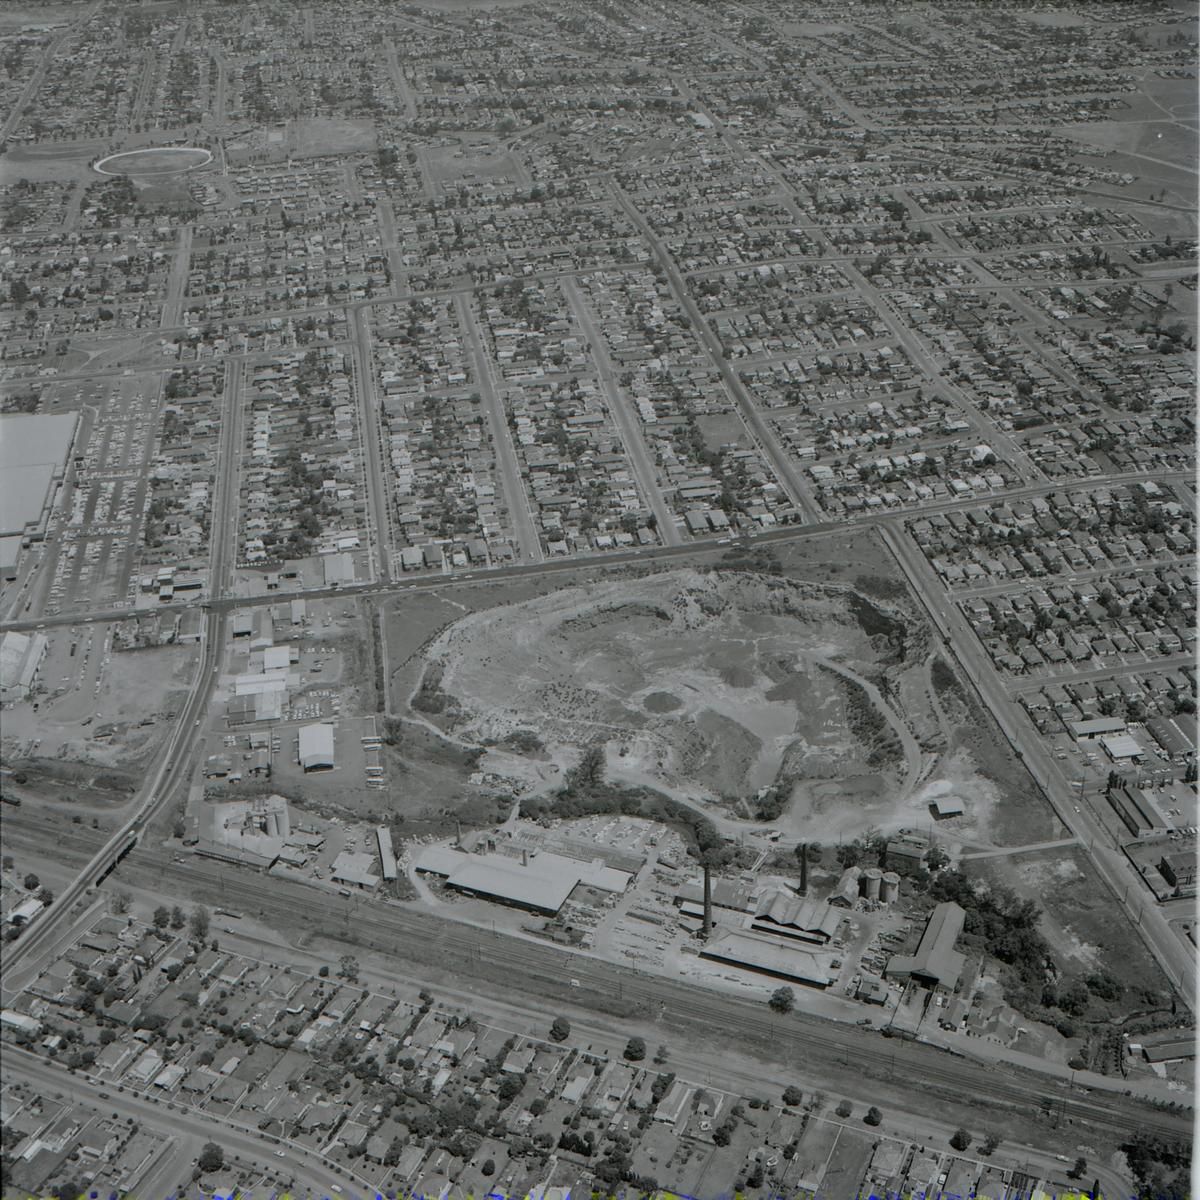 Aerial view of Holroyd Brickworks, today Holroyd Gardens Park; railway line is in the foreground and Merrylands Park is in the background. Source: Community Archives Collection ACC002/103/005